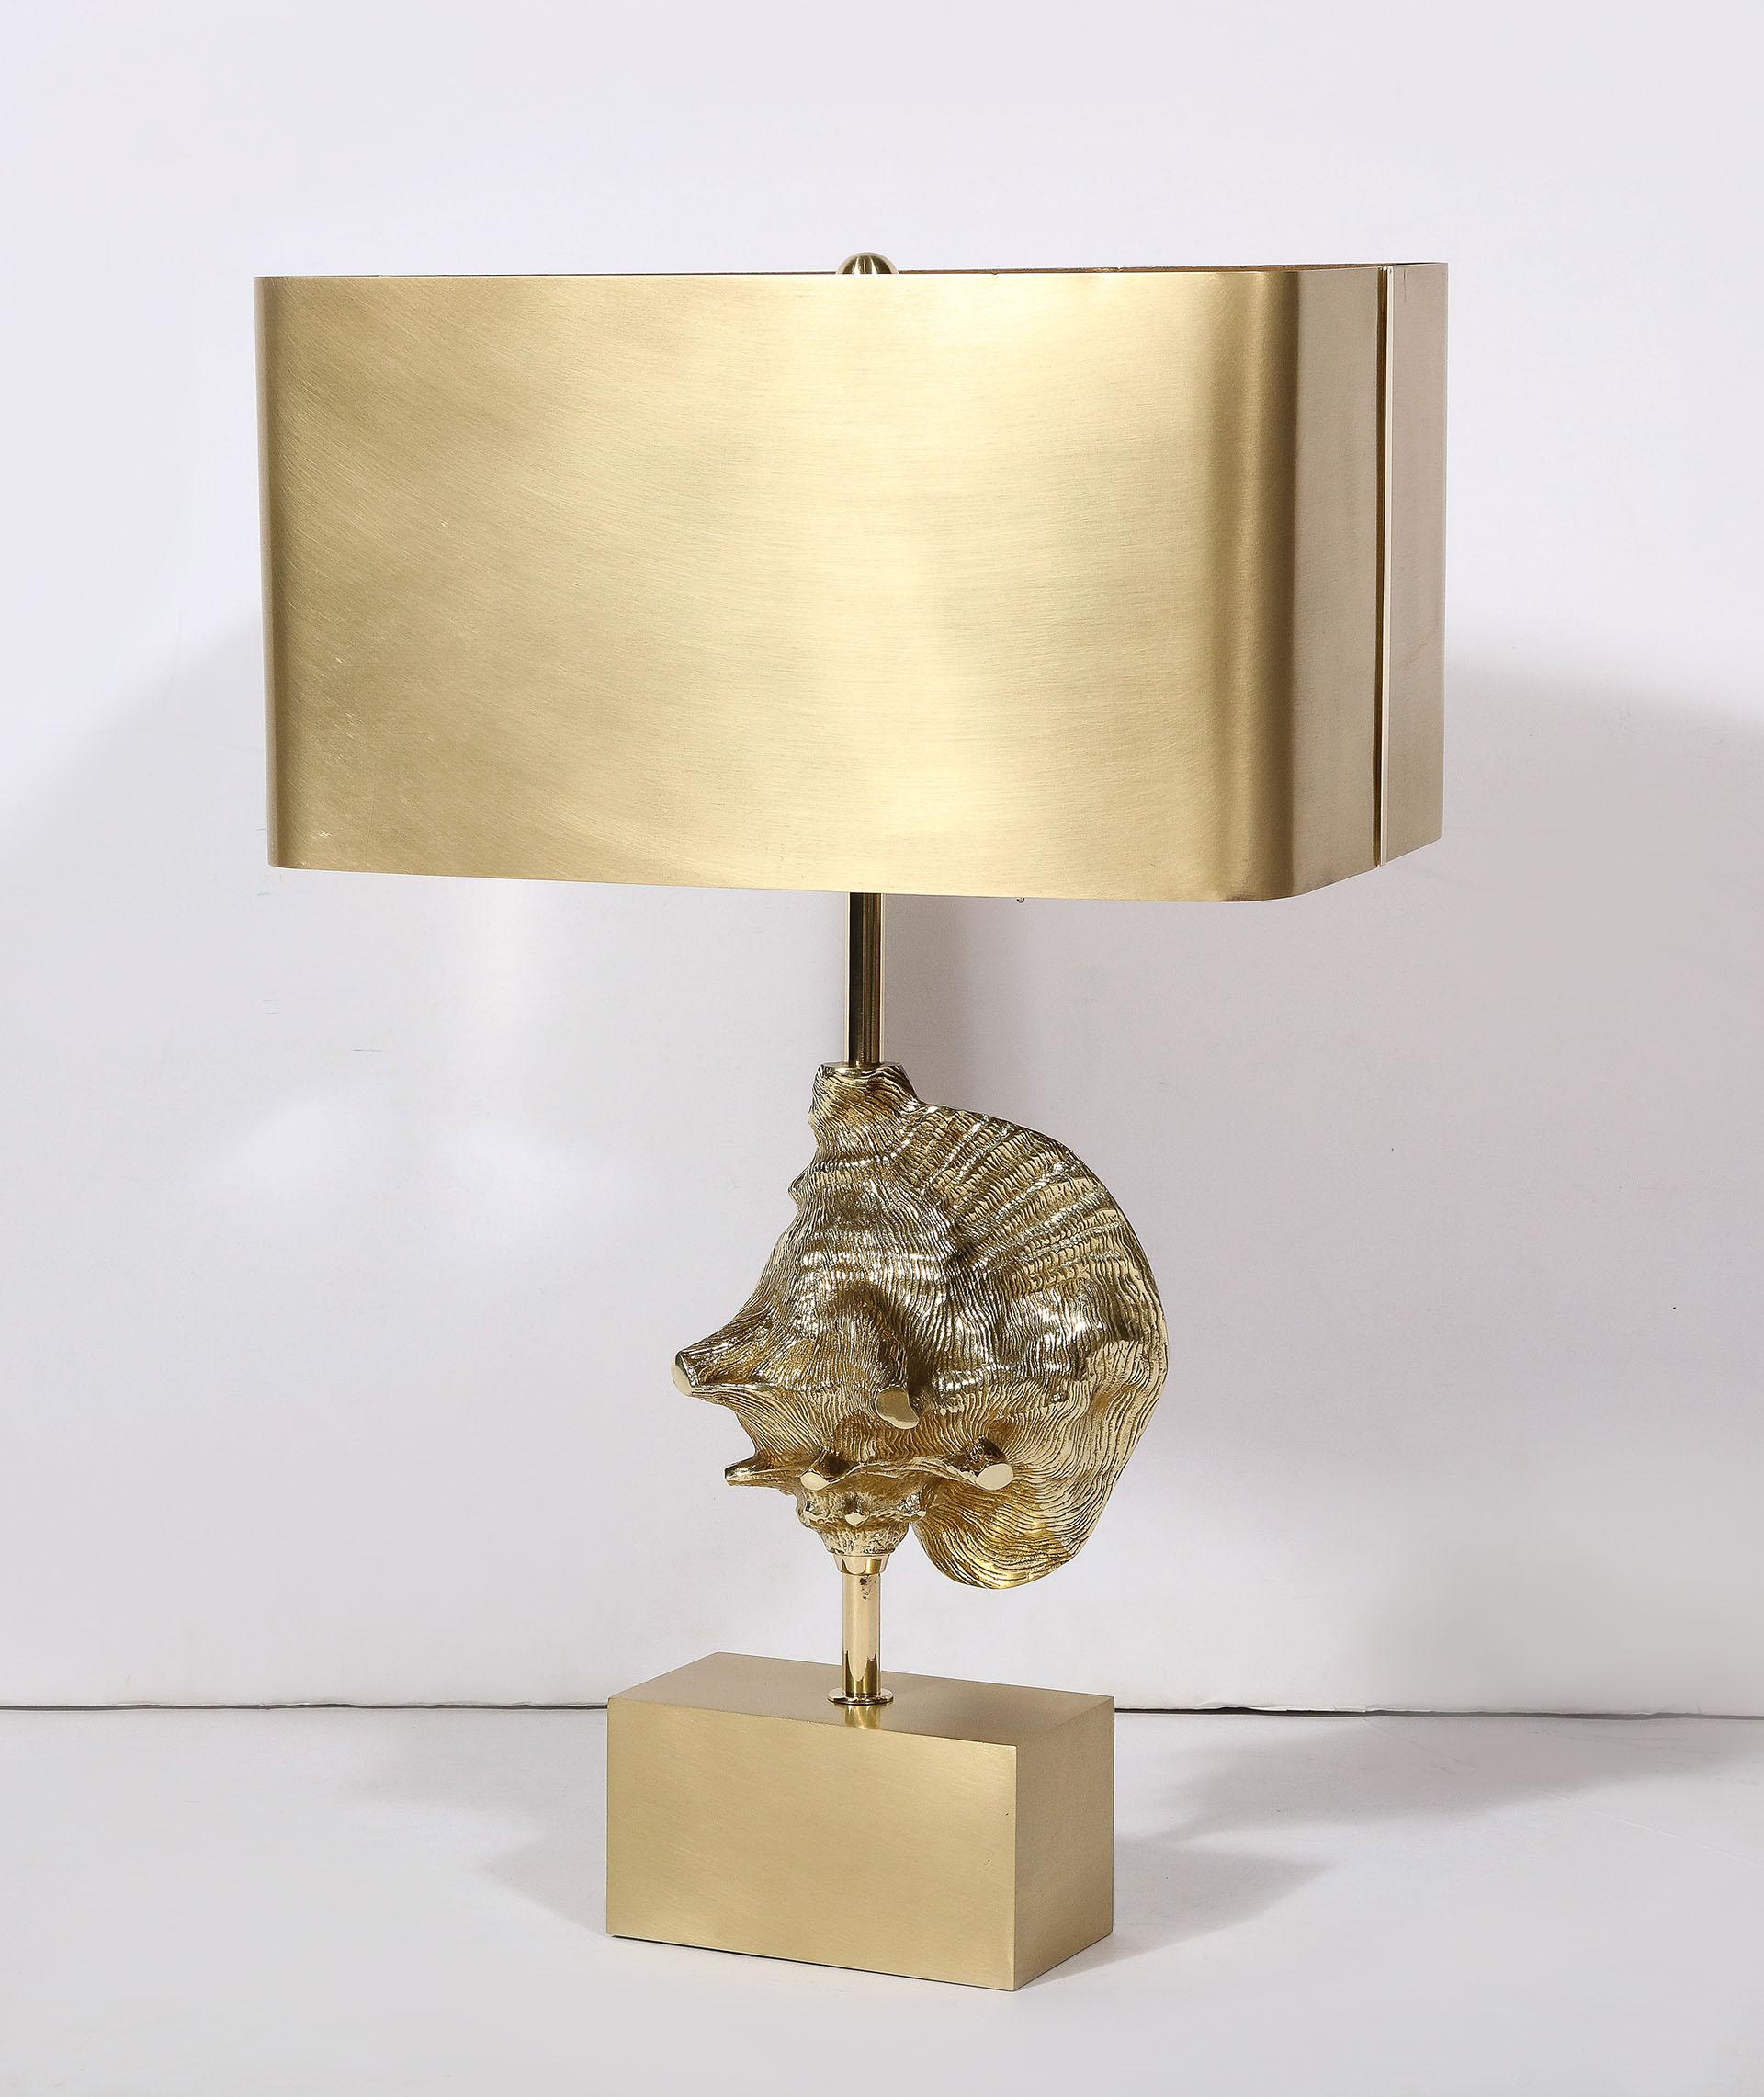 The brass lamp, titled 